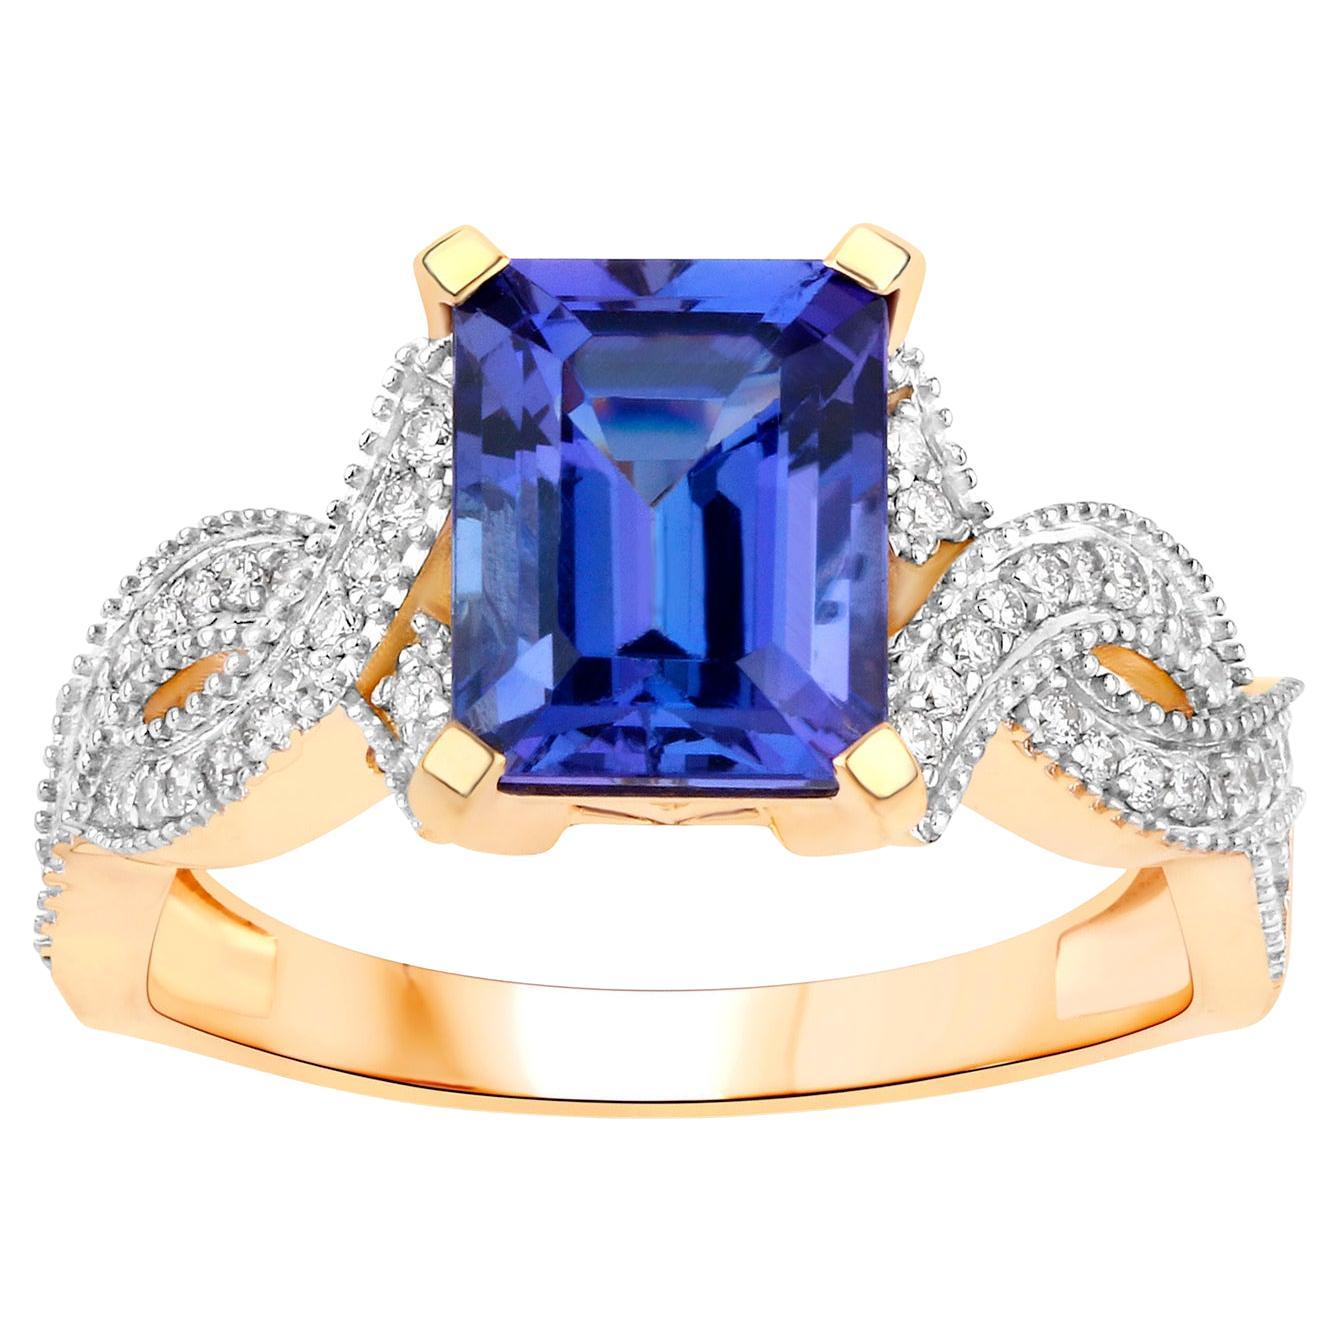 Tanzanite Ring With Diamonds 3.01 Carats 14K Yellow Gold For Sale